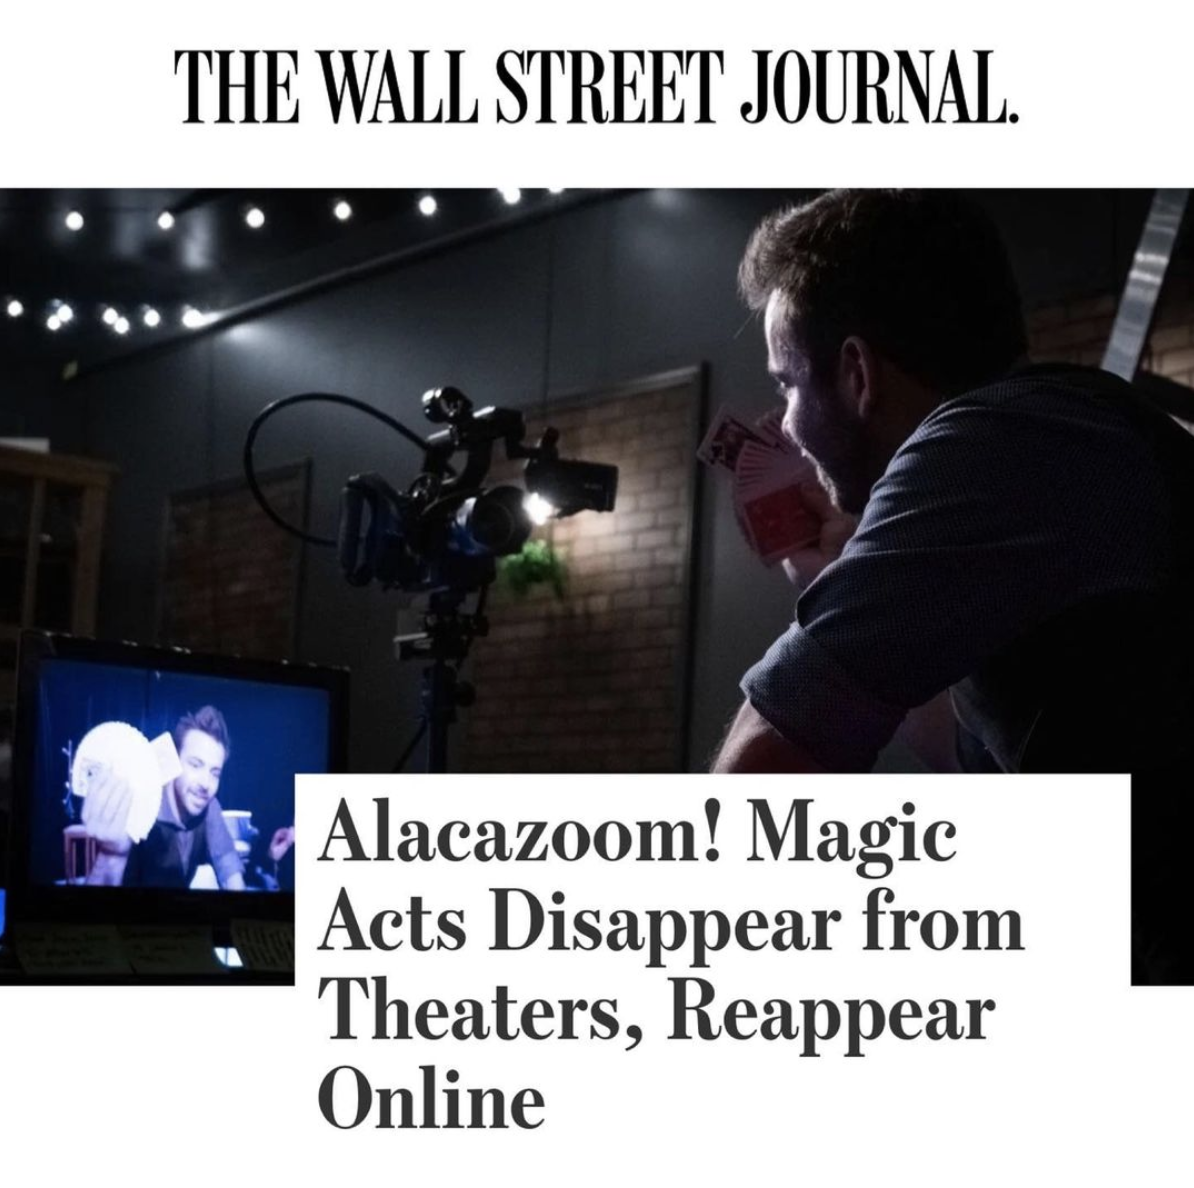 https://www.wsj.com/articles/alacazoom-magic-acts-disappear-from-theaters-reappear-online-11608482754